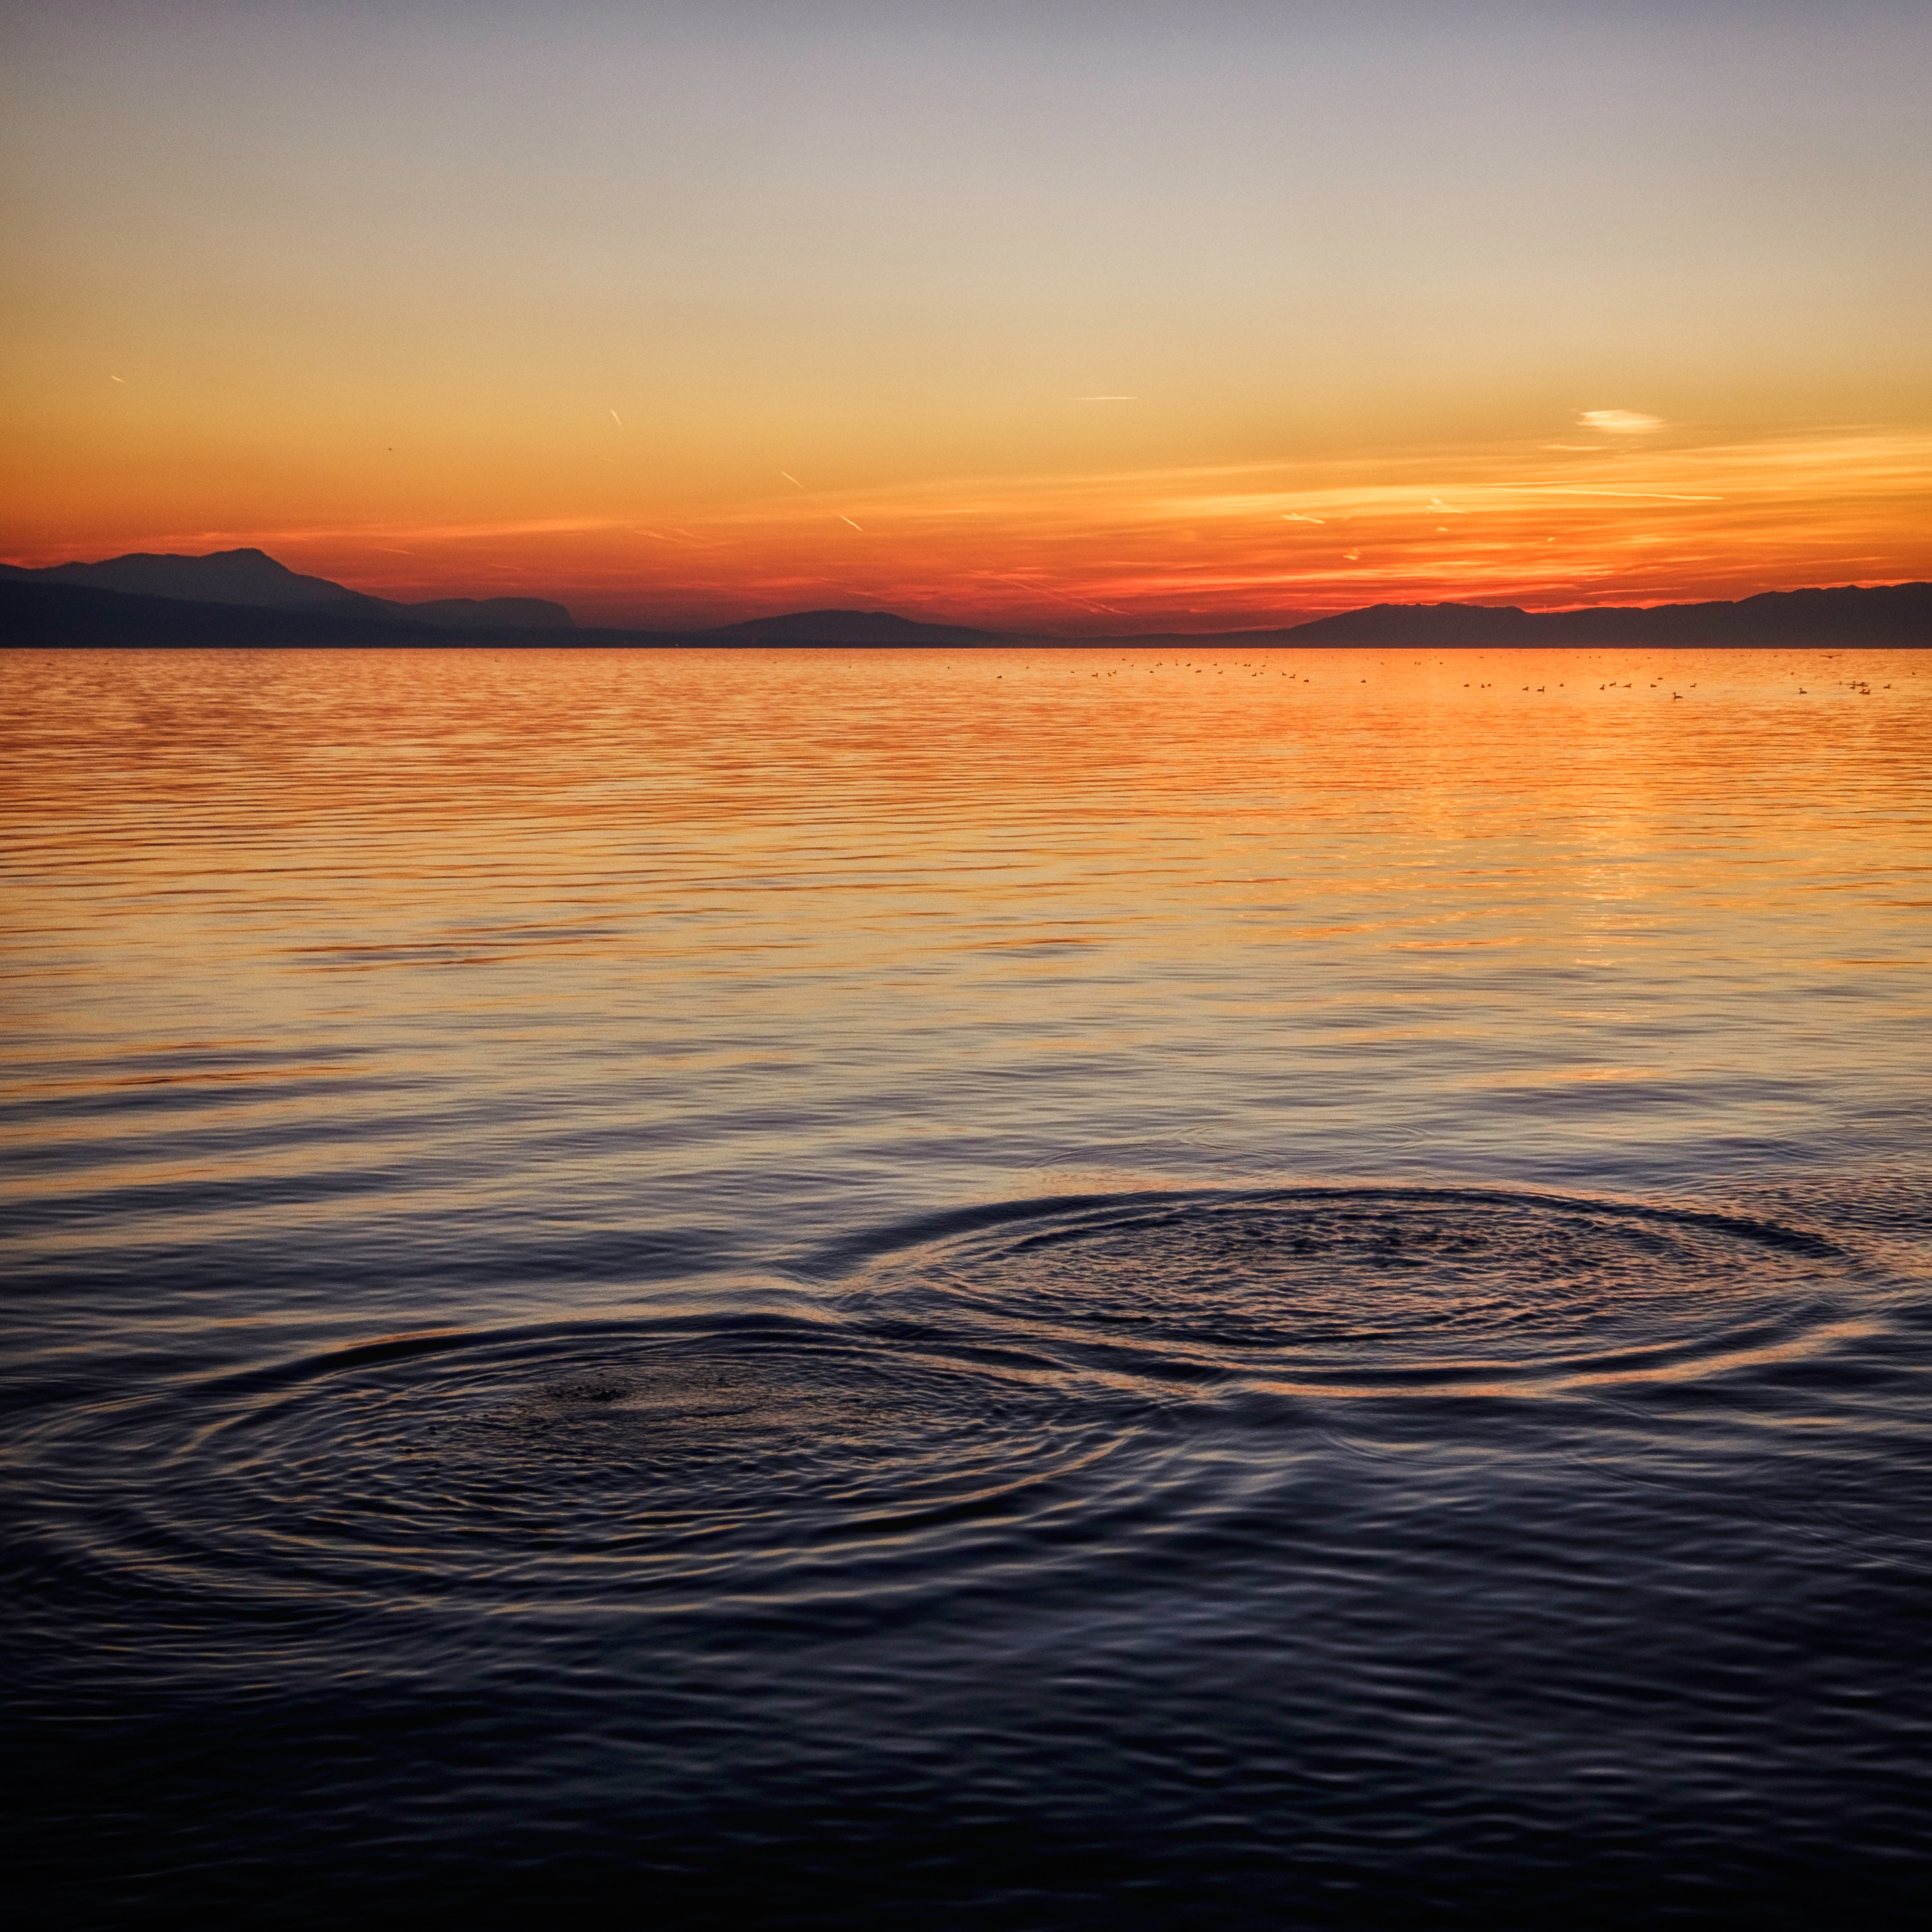 Those ripples touch the souls of every being